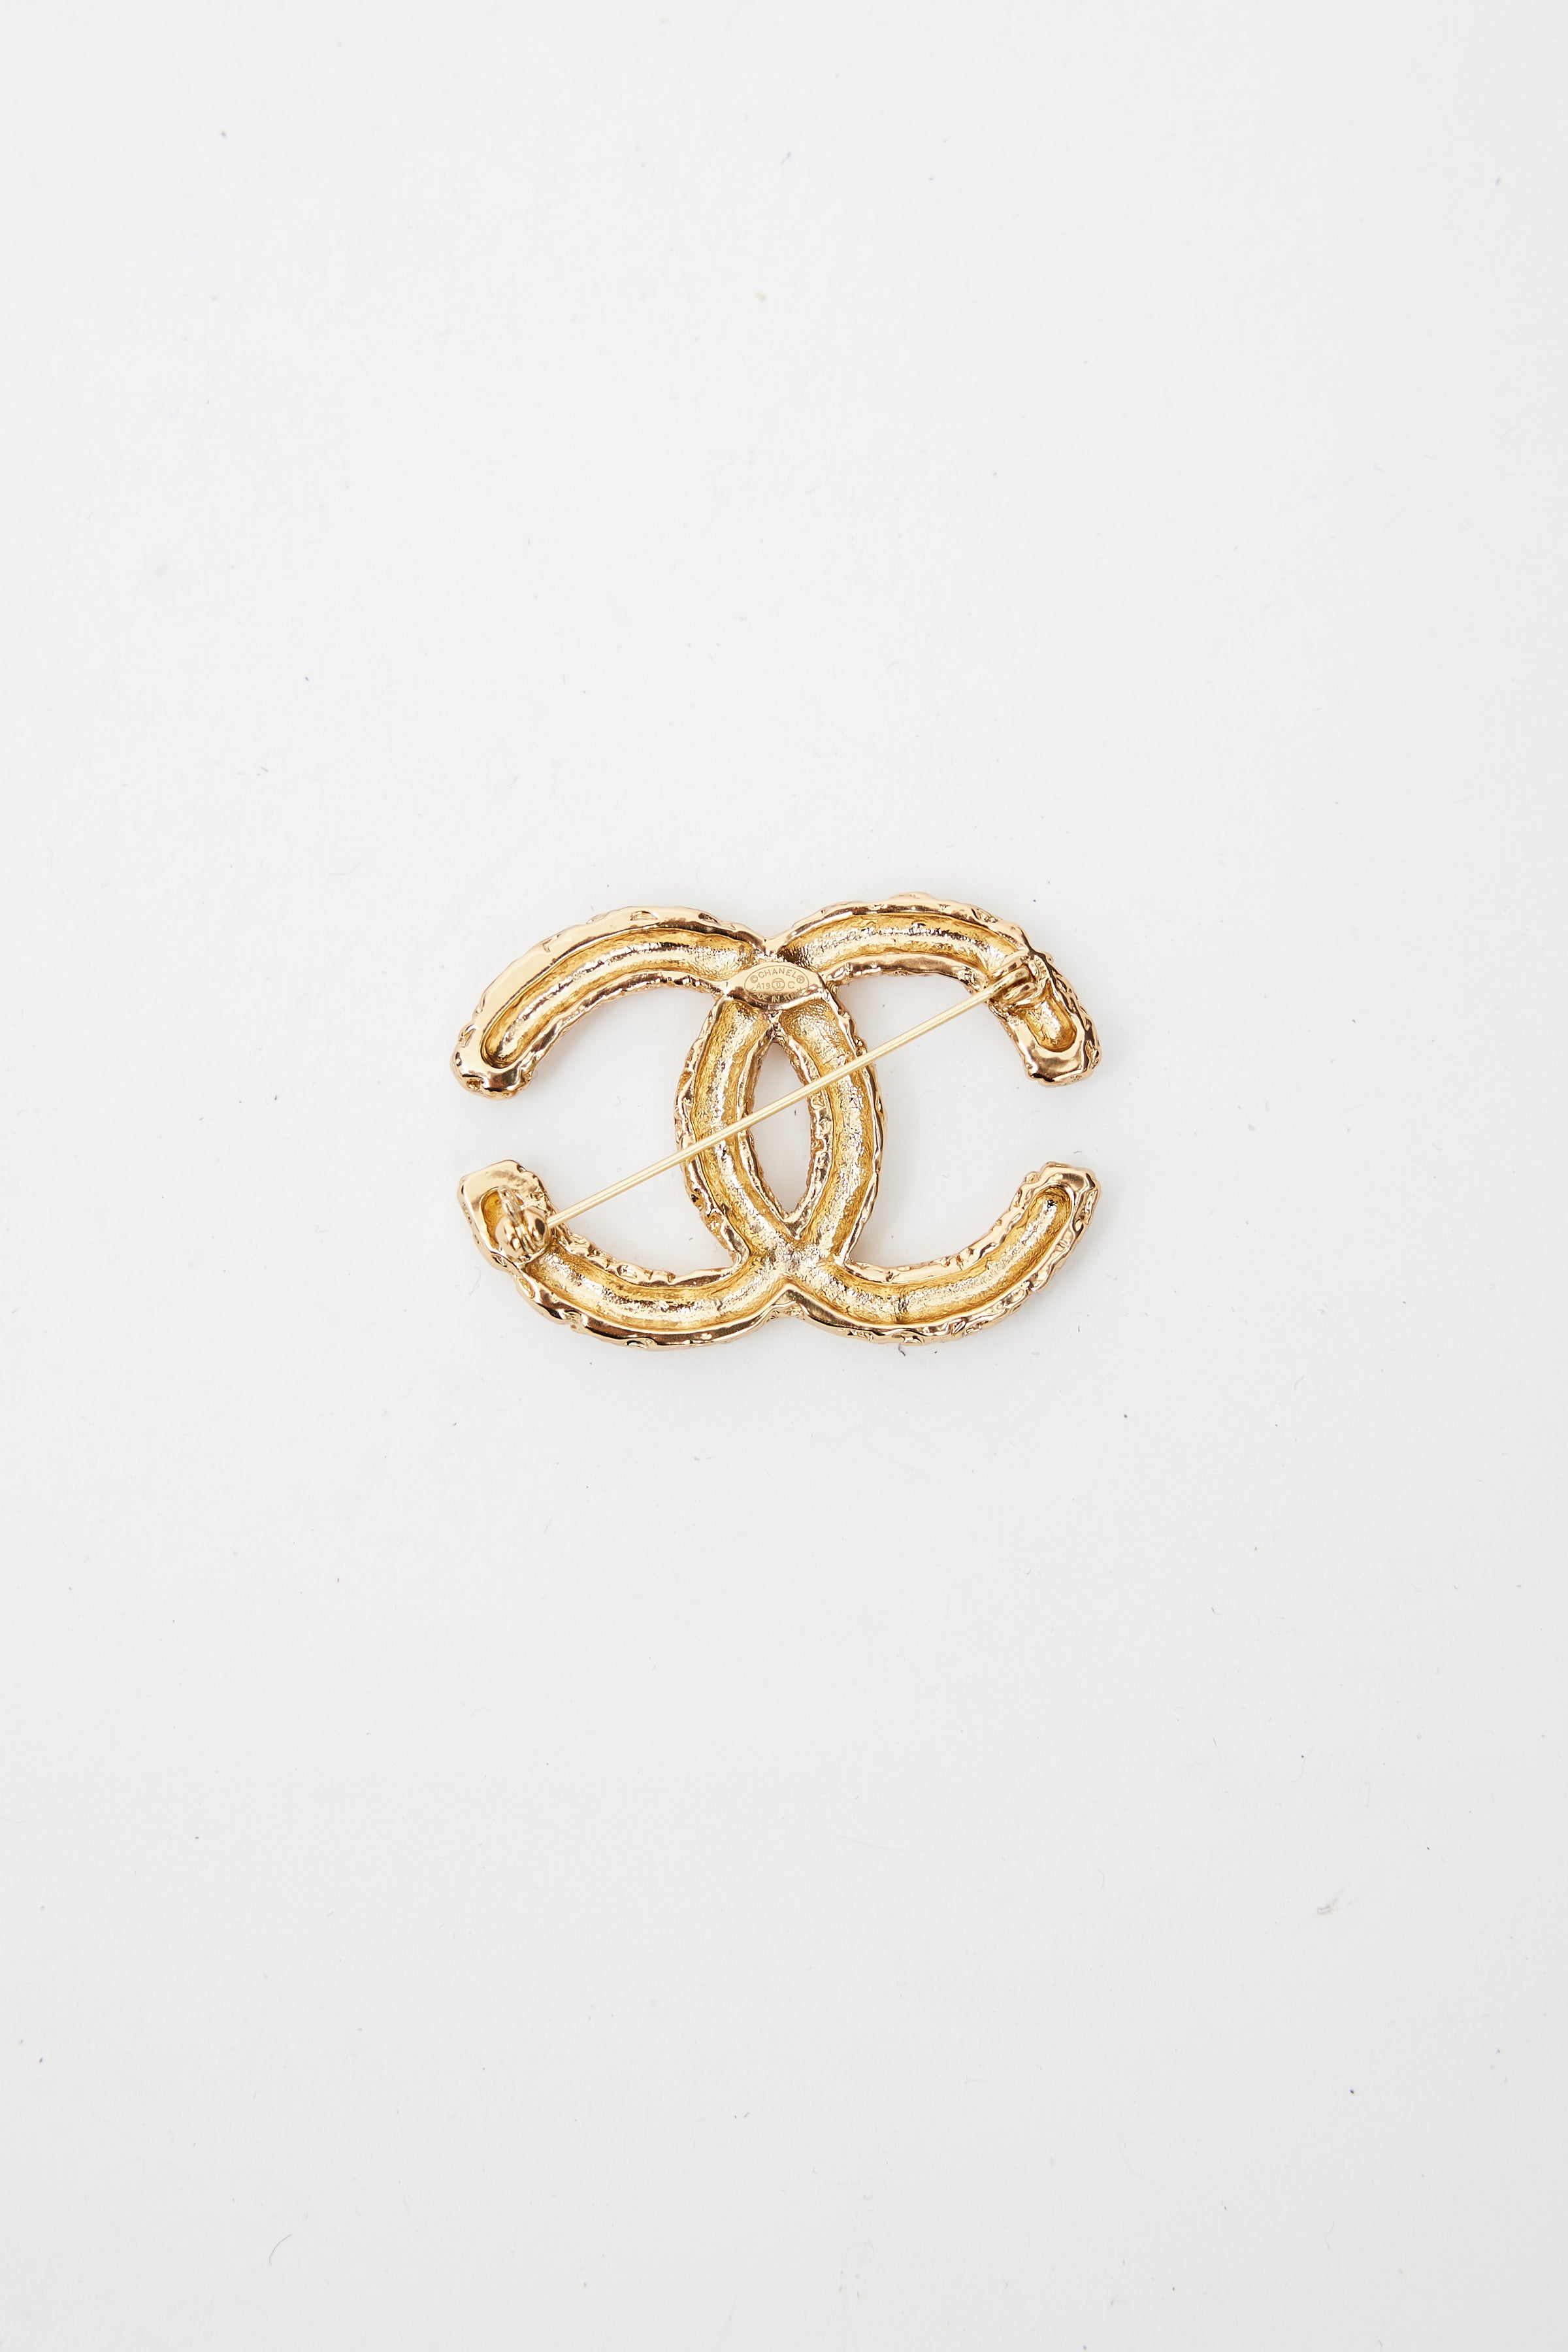 Chanel // Cruise 2019 Gold Textured CC Brooch – VSP Consignment